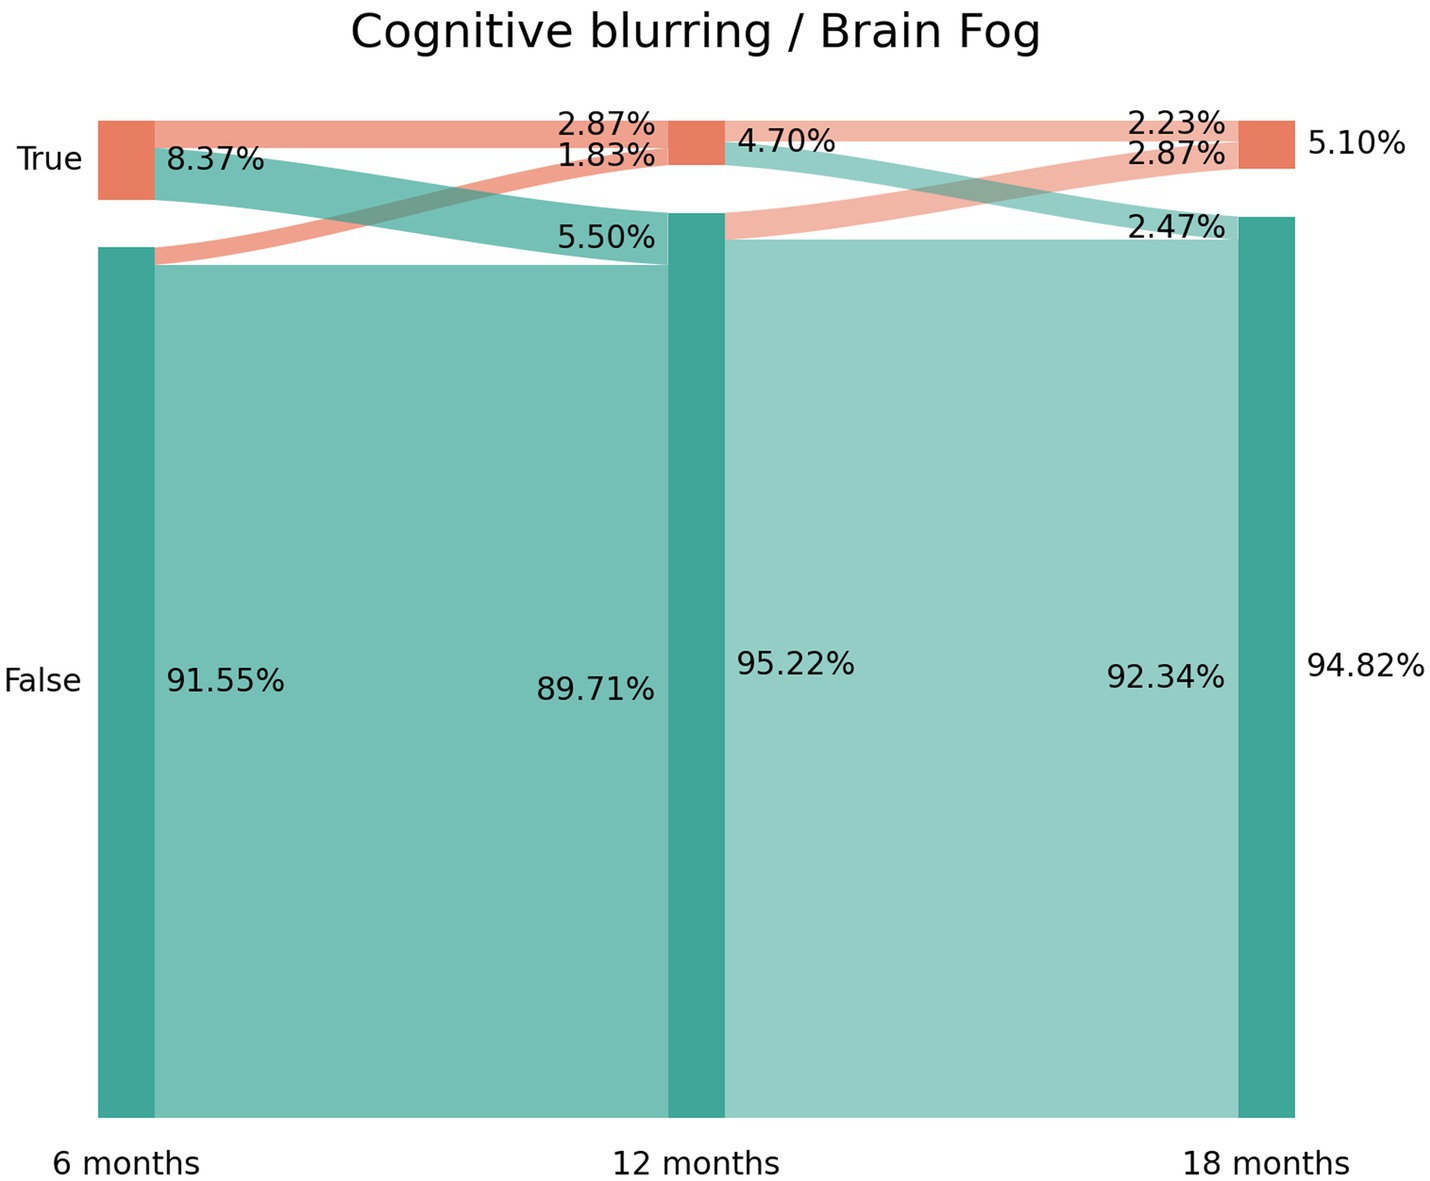 What is Brain Fog and how do you recover from it?